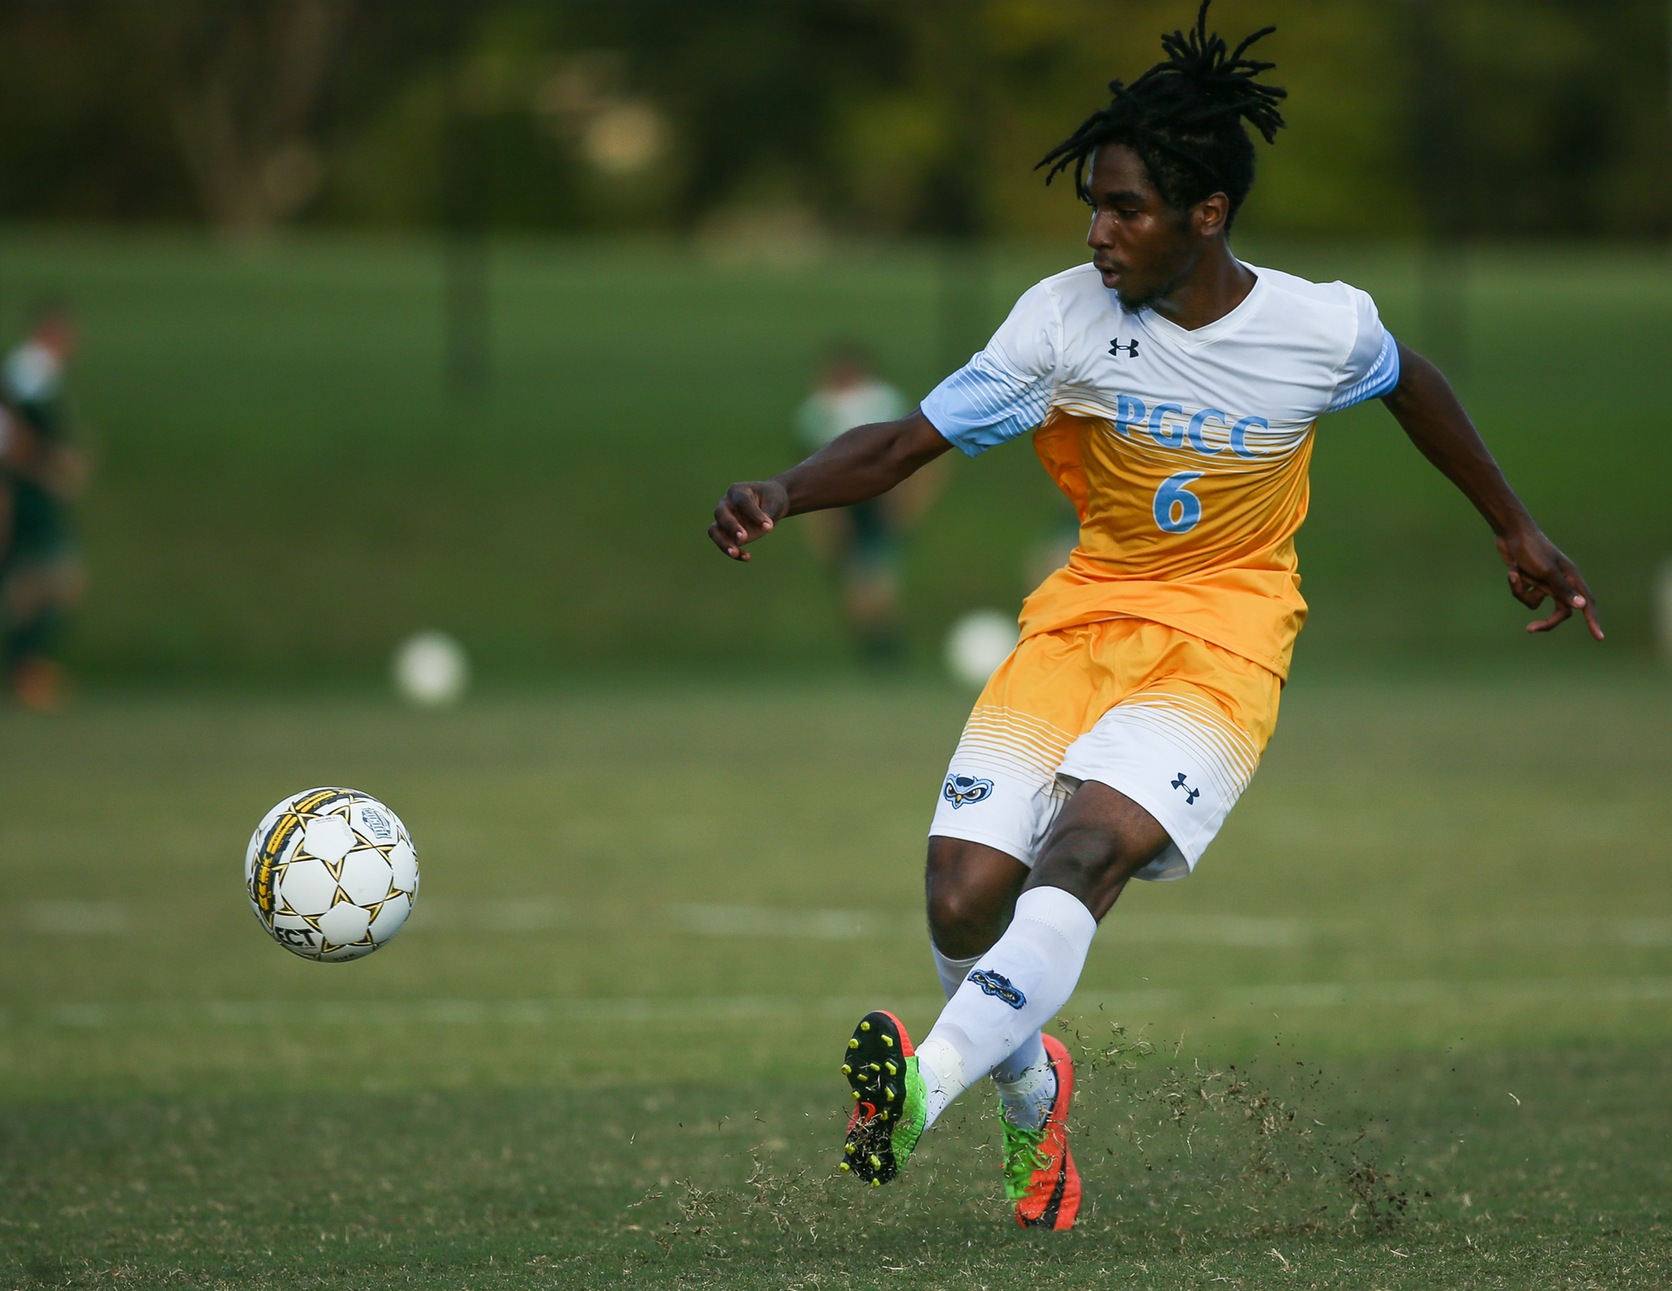 Goals By Sherif And Panton Helps No. 10 Prince George's Men's Soccer Knock Off No. 5 Montgomery, 2-1